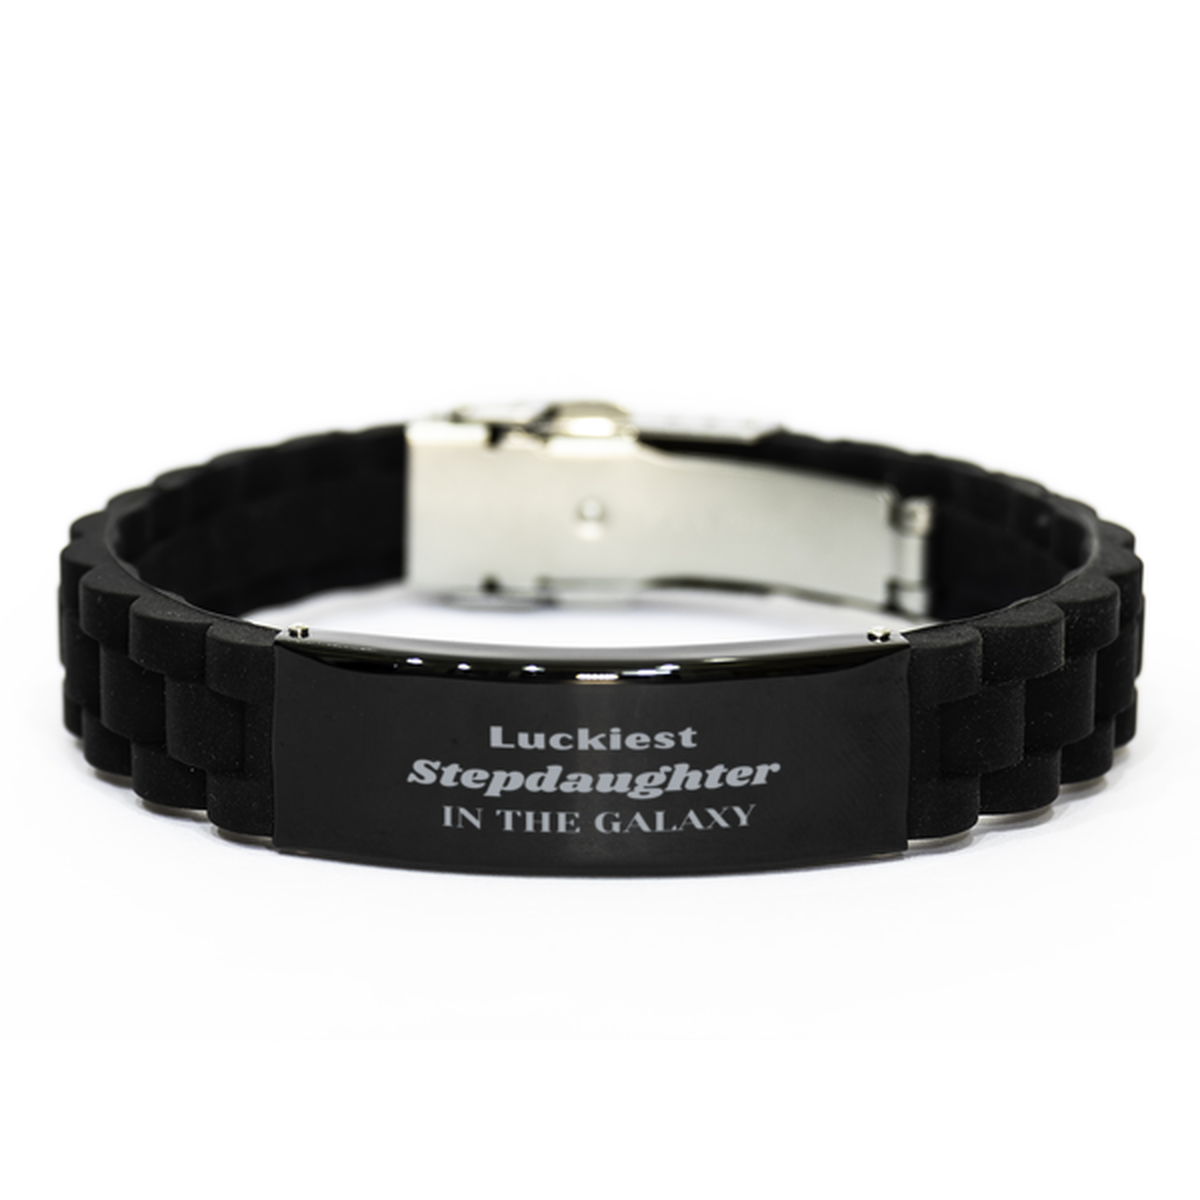 Luckiest Stepdaughter in the Galaxy, To My Stepdaughter Engraved Gifts, Christmas Stepdaughter Black Glidelock Clasp Bracelet Gifts, X-mas Birthday Unique Gifts For Stepdaughter Men Women